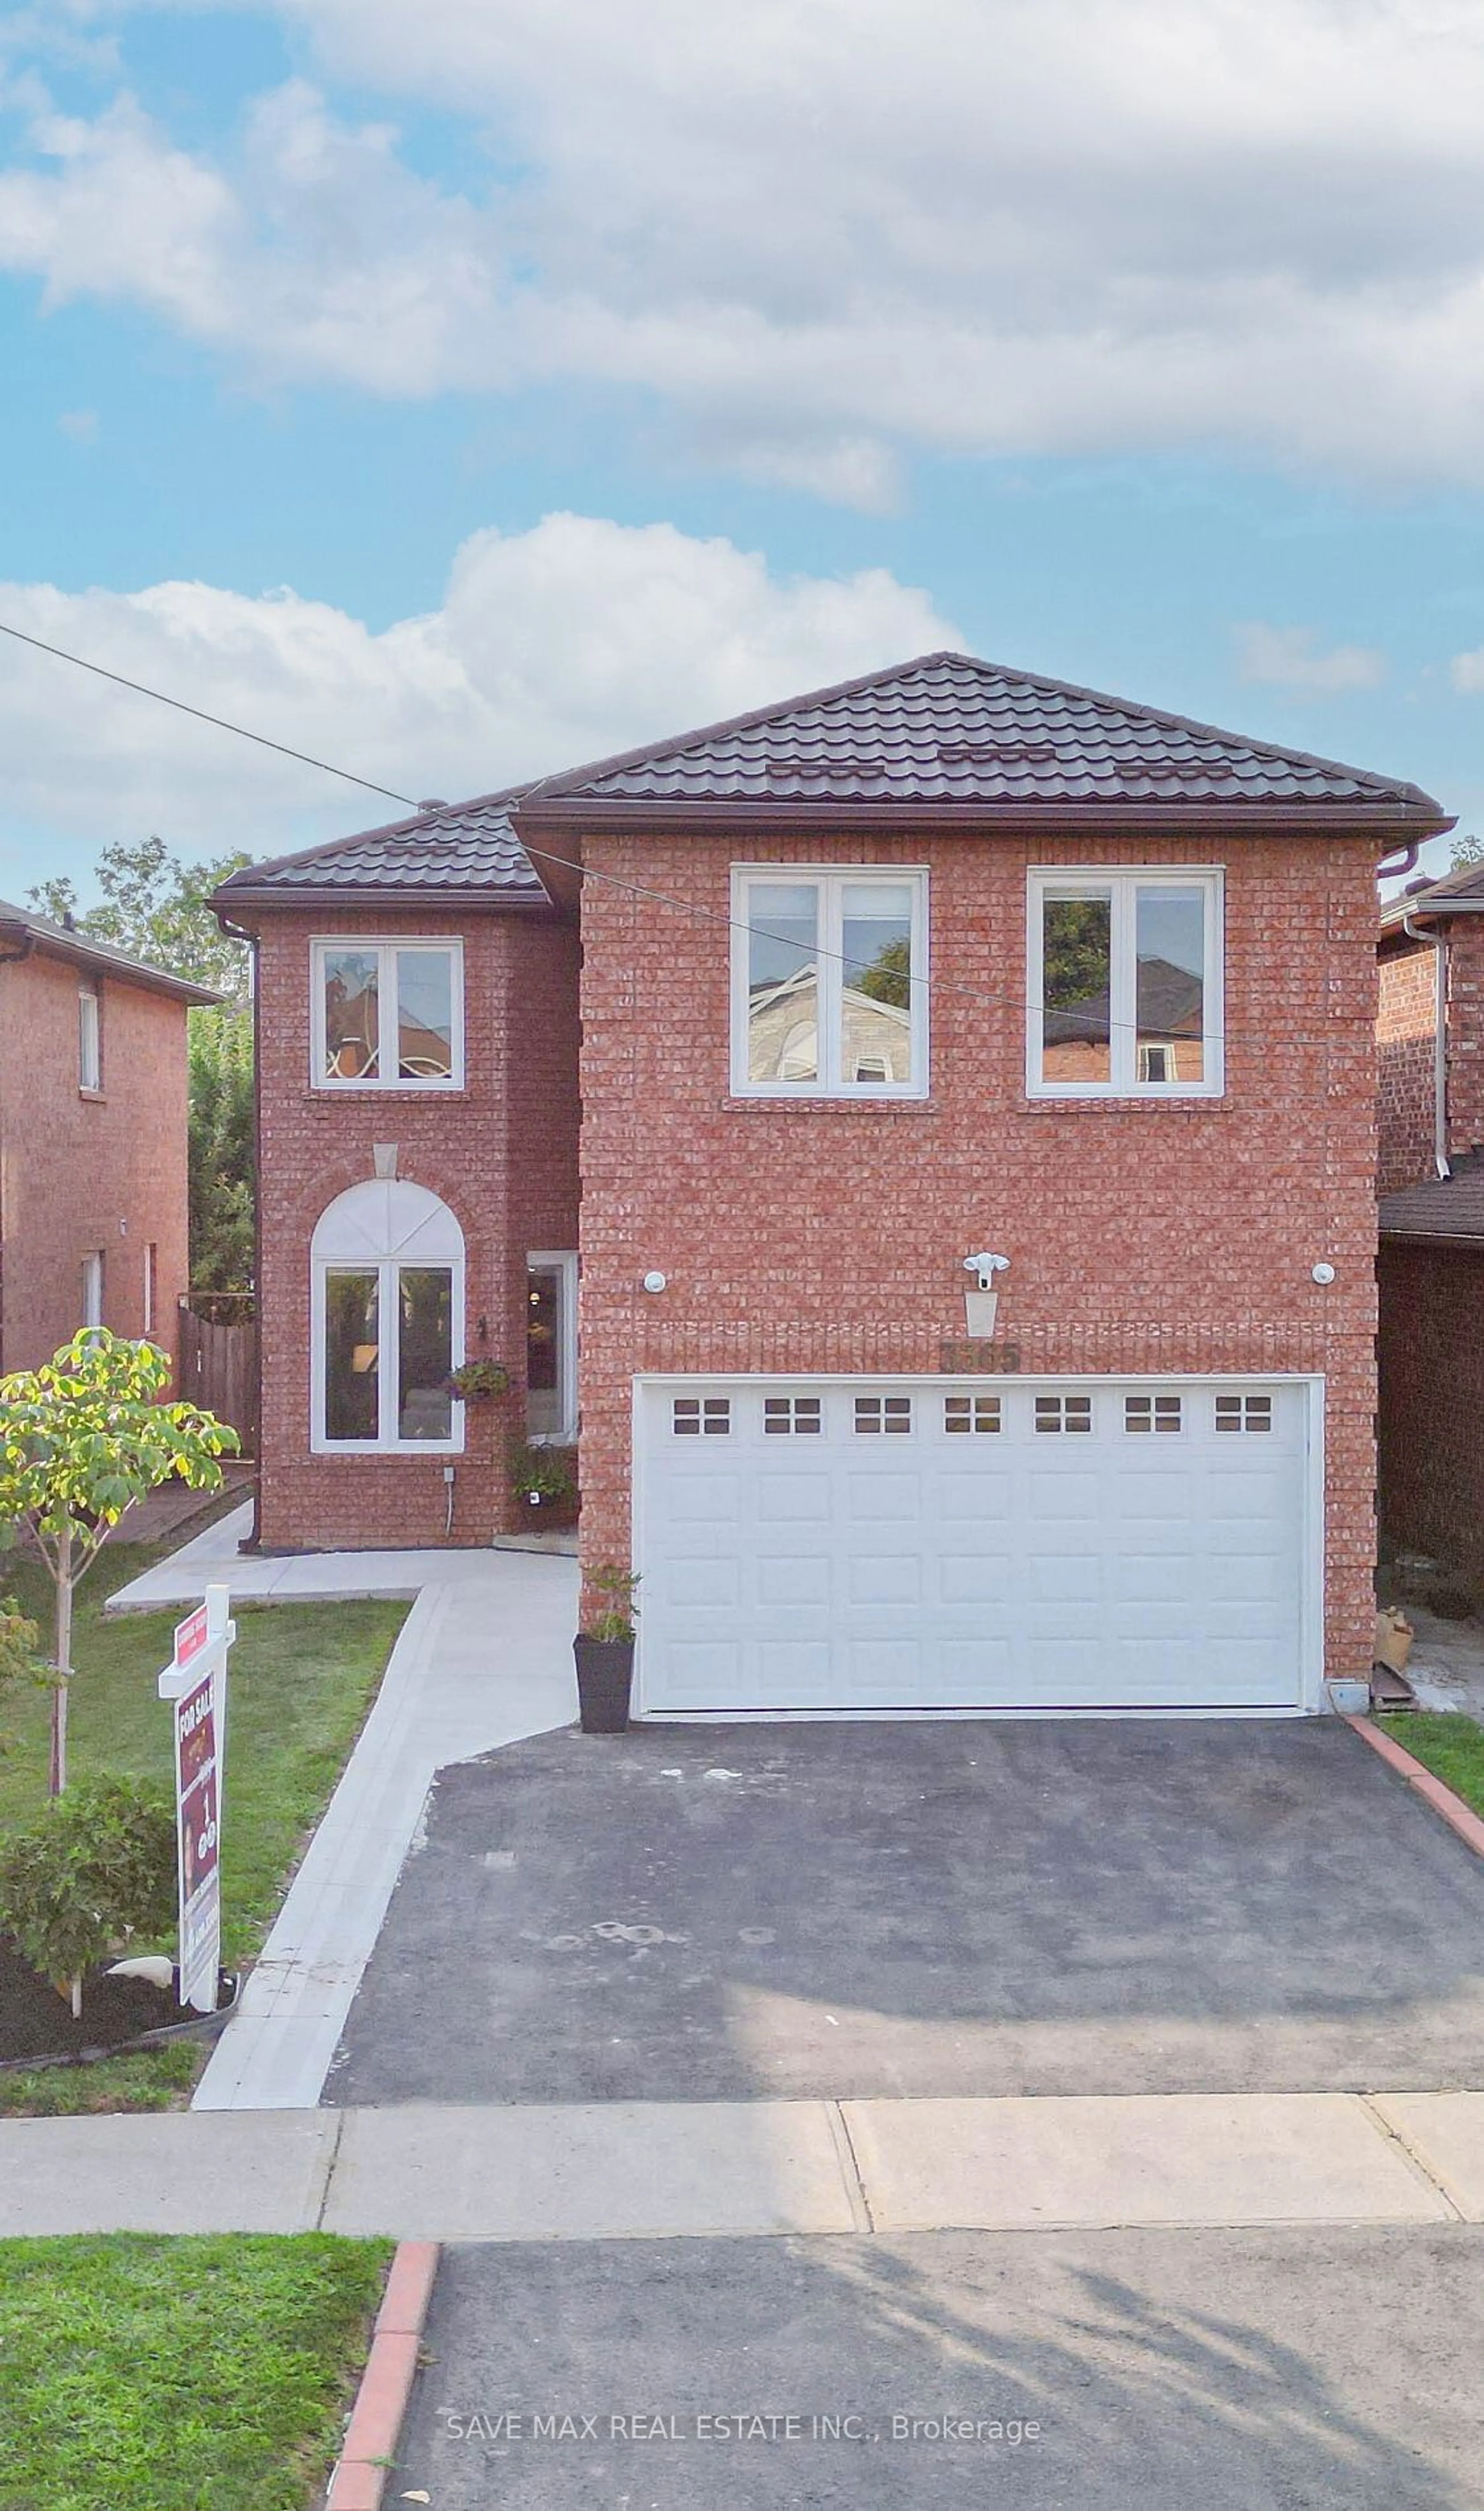 Home with brick exterior material for 3365 Bobwhite Mews, Mississauga Ontario L5N 6E7